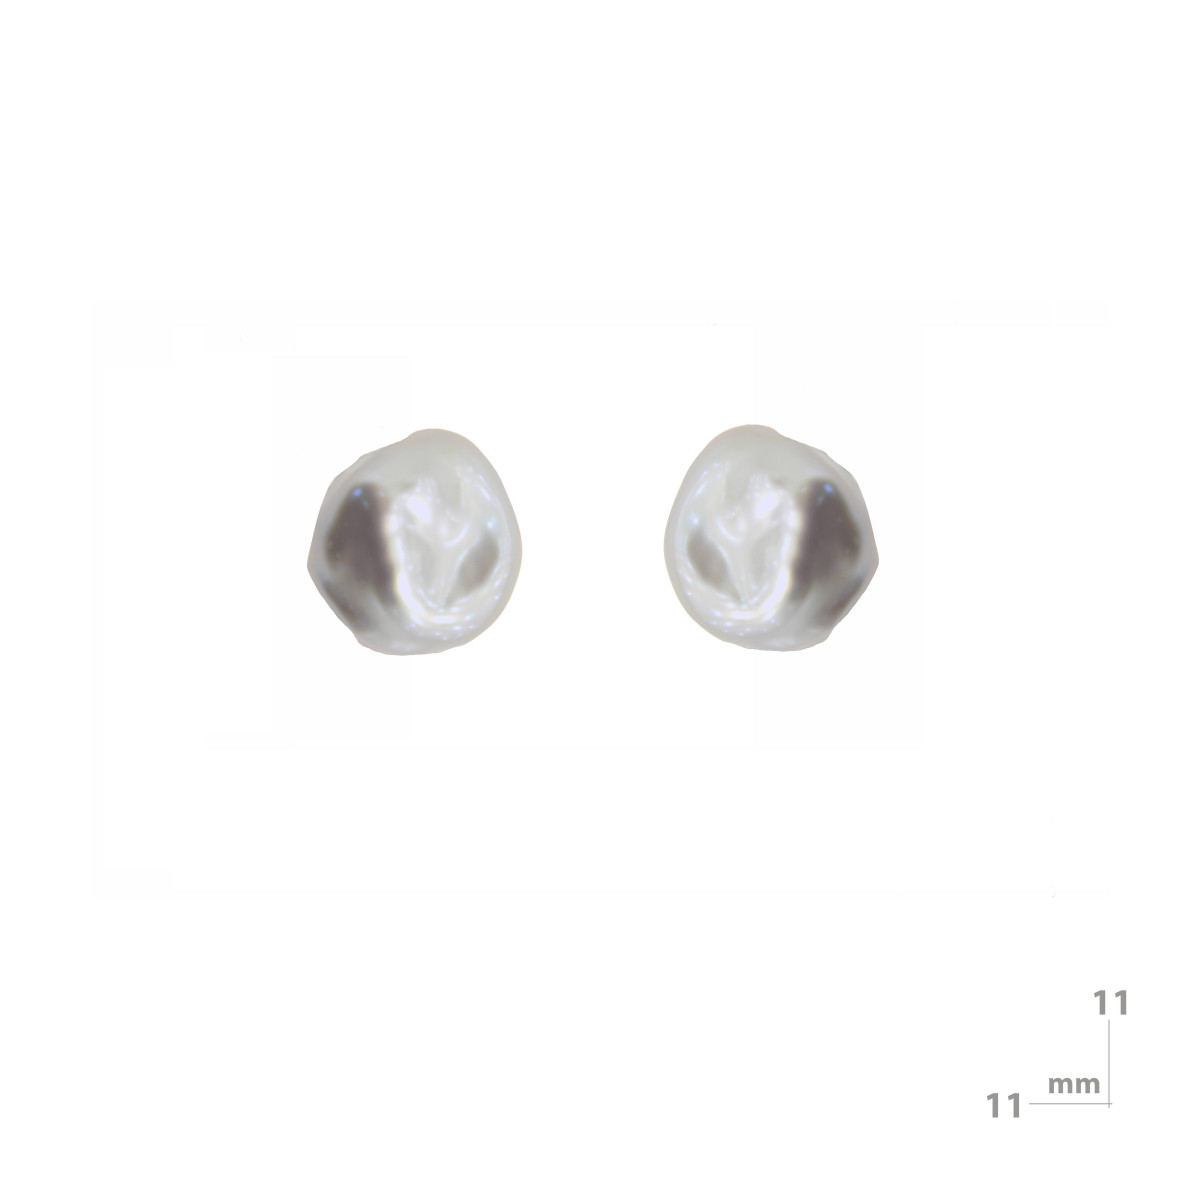 Silver and baroque pearl earrings